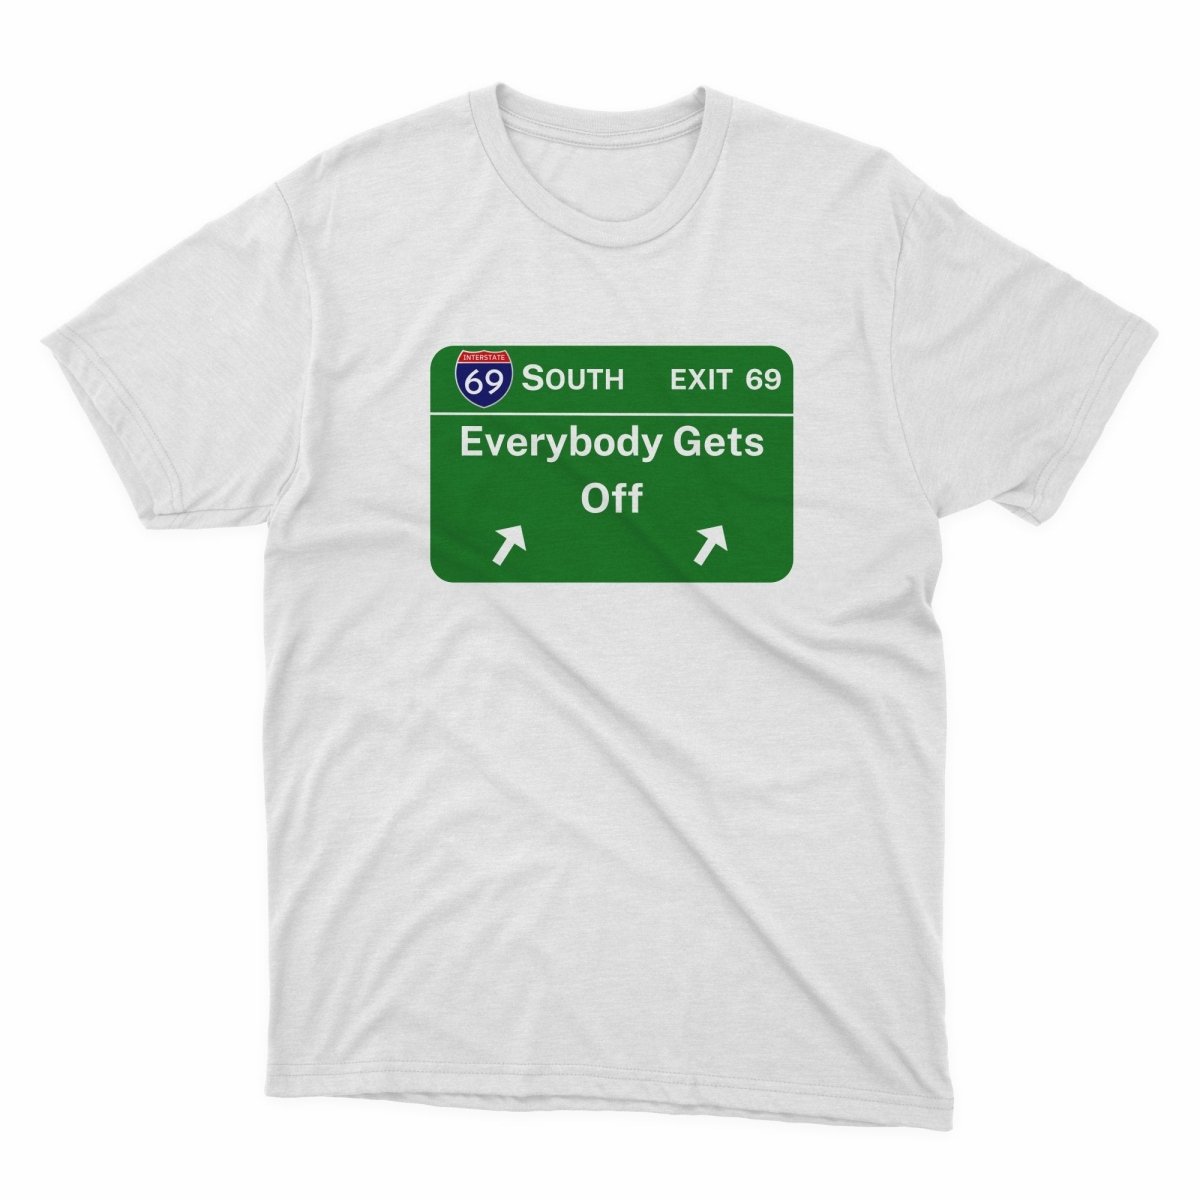 Exit 69 Shirt - stickerbullExit 69 ShirtShirtsPrintifystickerbull19411484310626761789WhiteSa white t - shirt with a green sign that says south exit 89 everybody gets